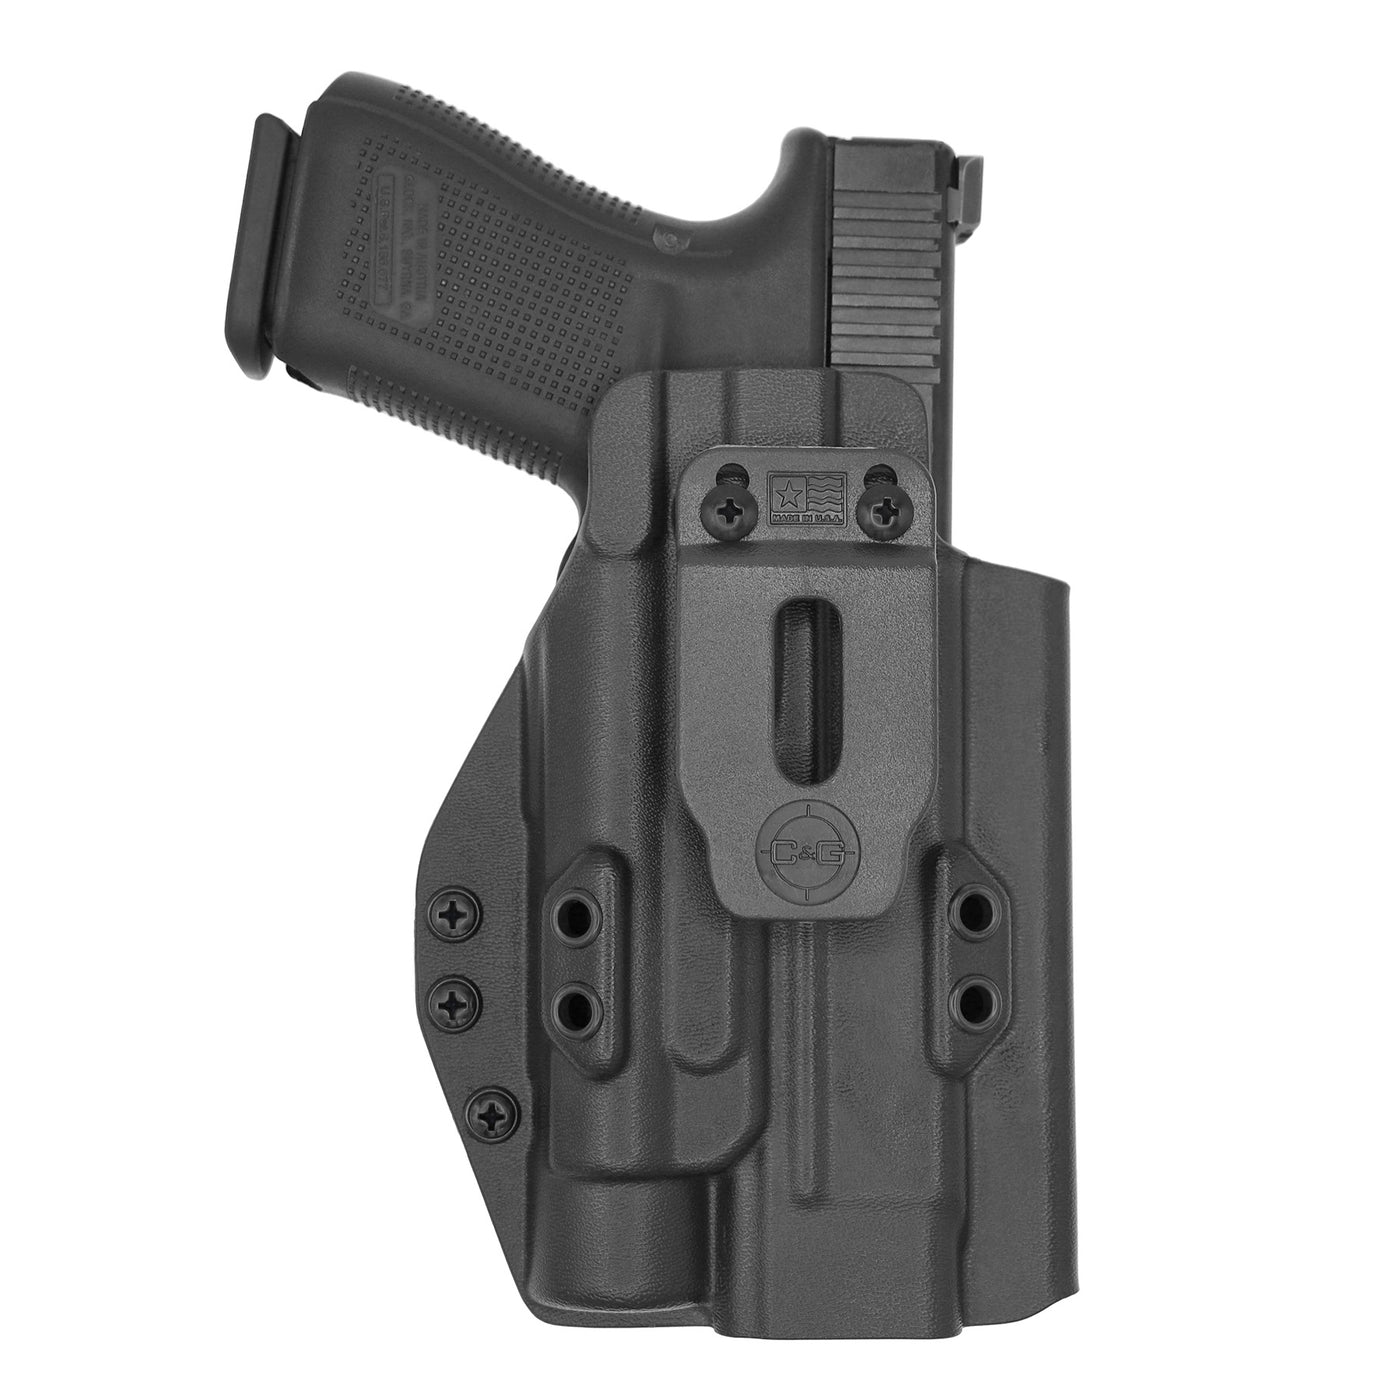 C&G Holsters custom IWB Tactical Glock 20/21 Streamlight TLR1 in holstered position